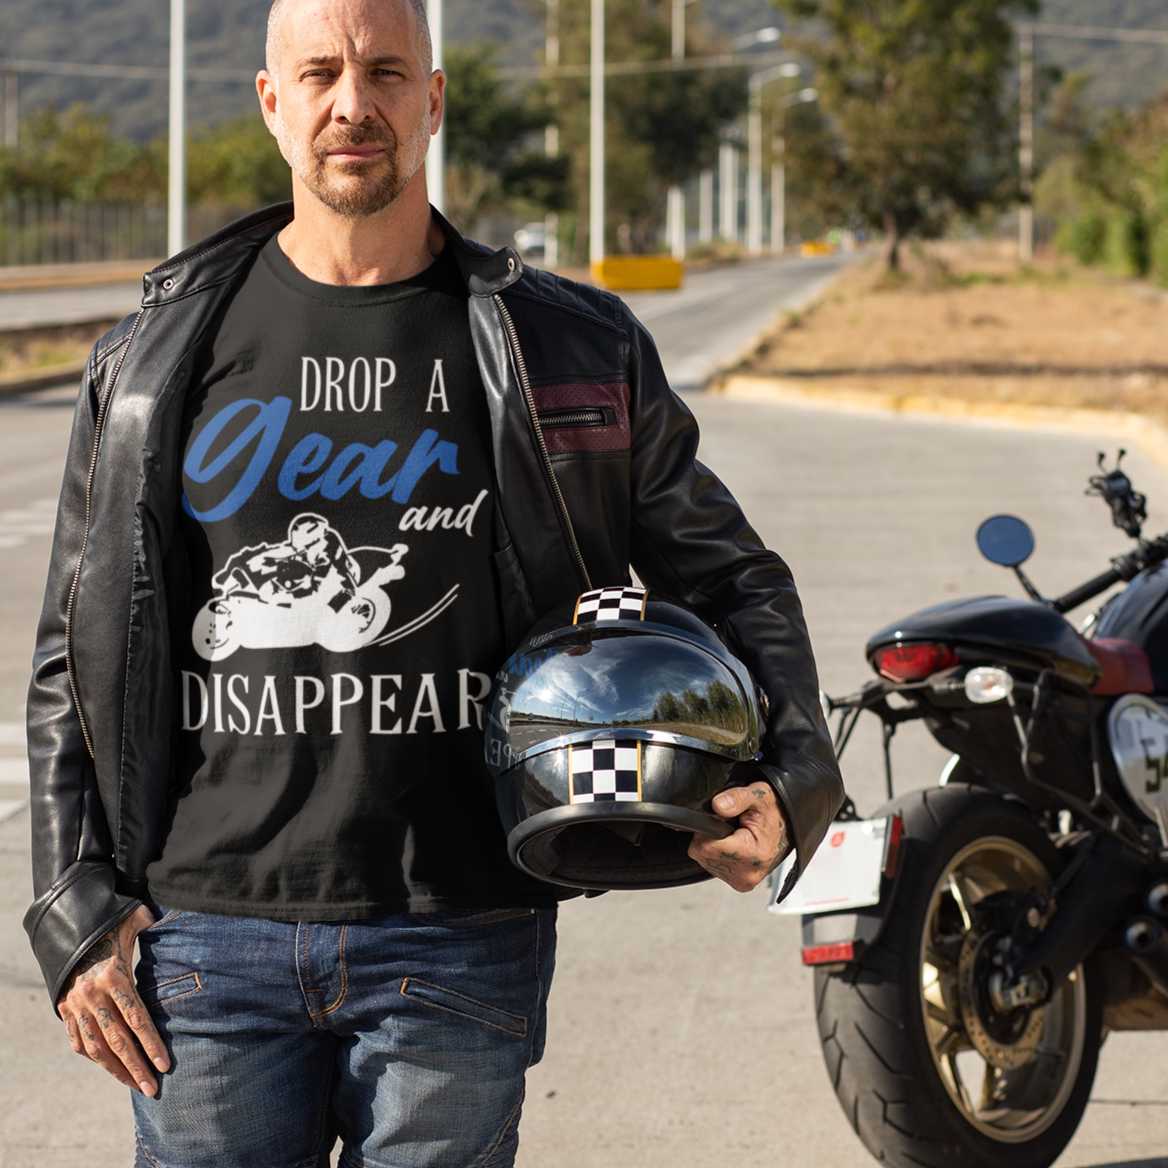 drop-a-gear-and-disappear-t-shirt-mockup-featuring-a-biker-posing-near-his-motorcycle